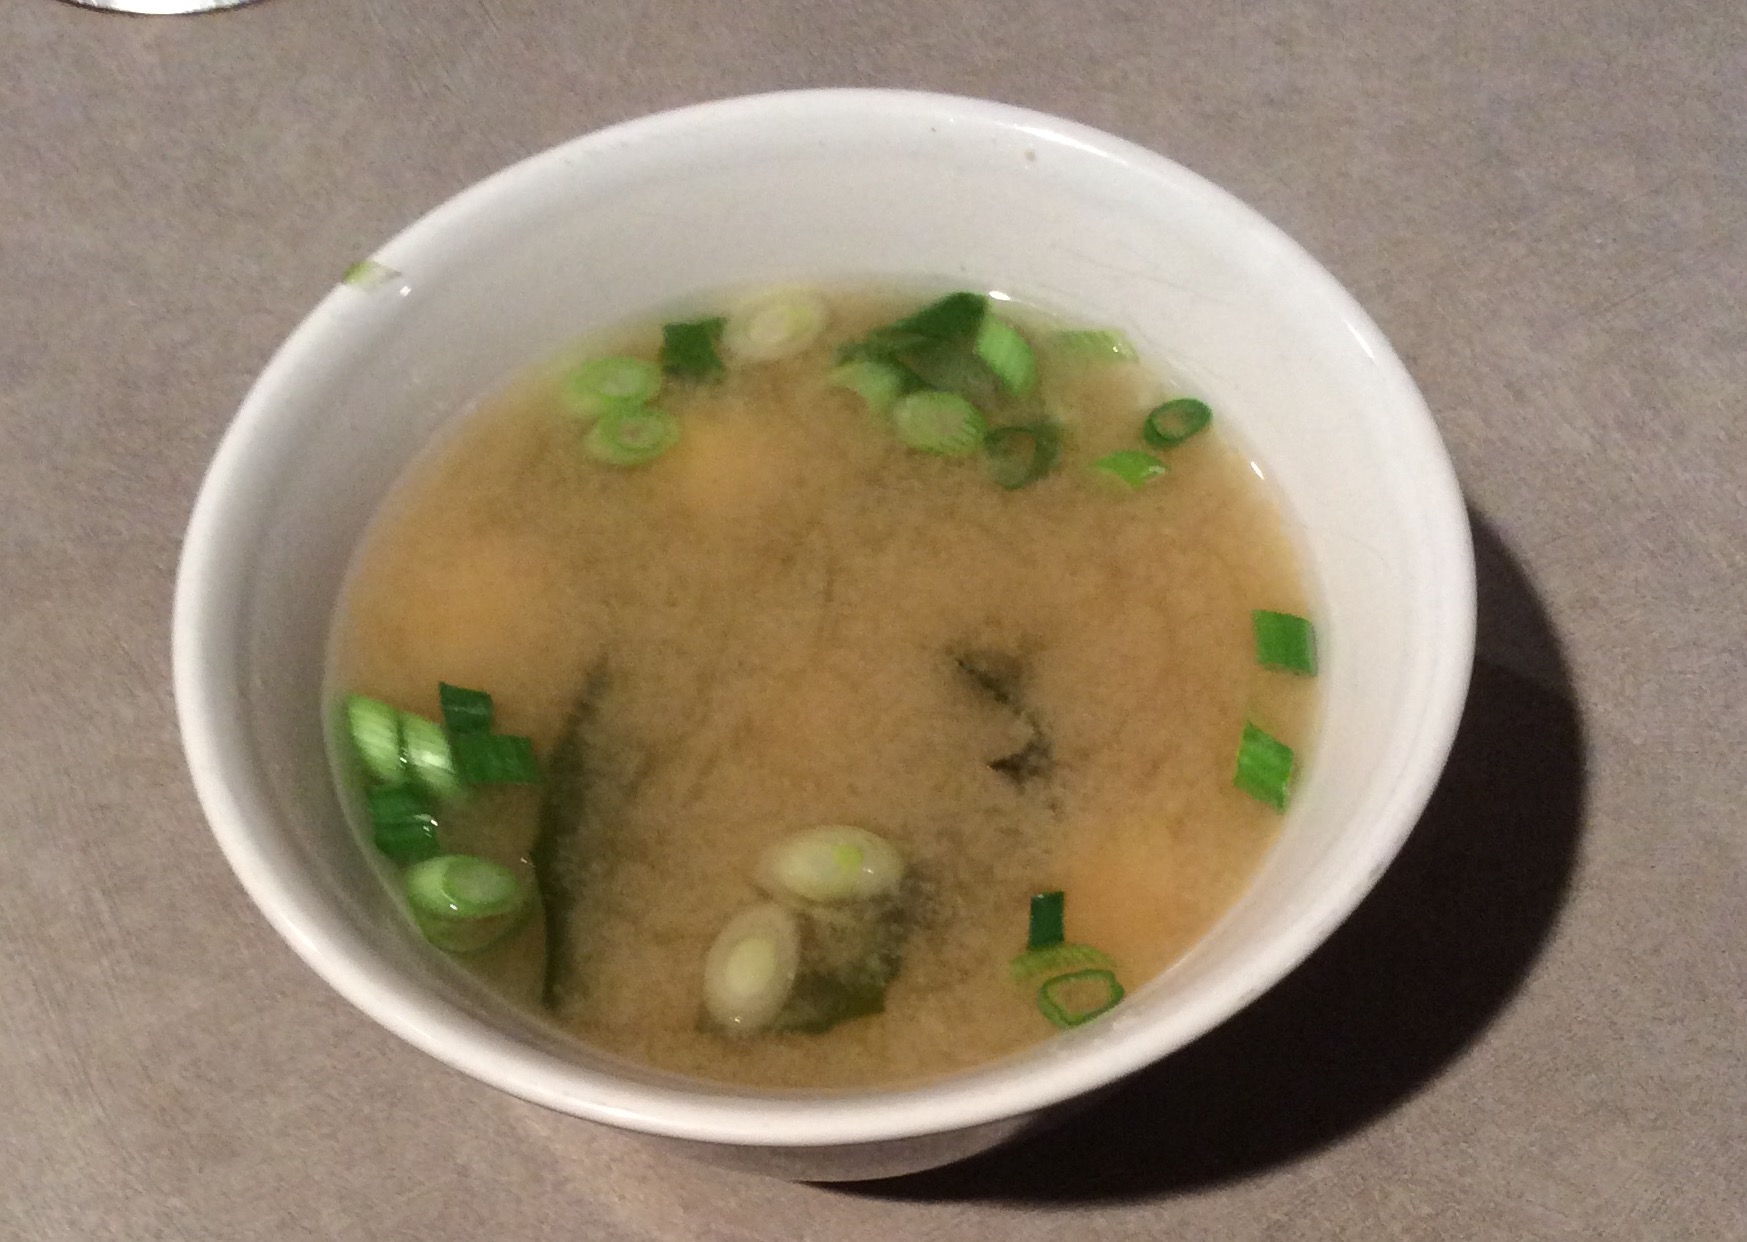 Bowl of miso soup with fresh green onions added after cooking